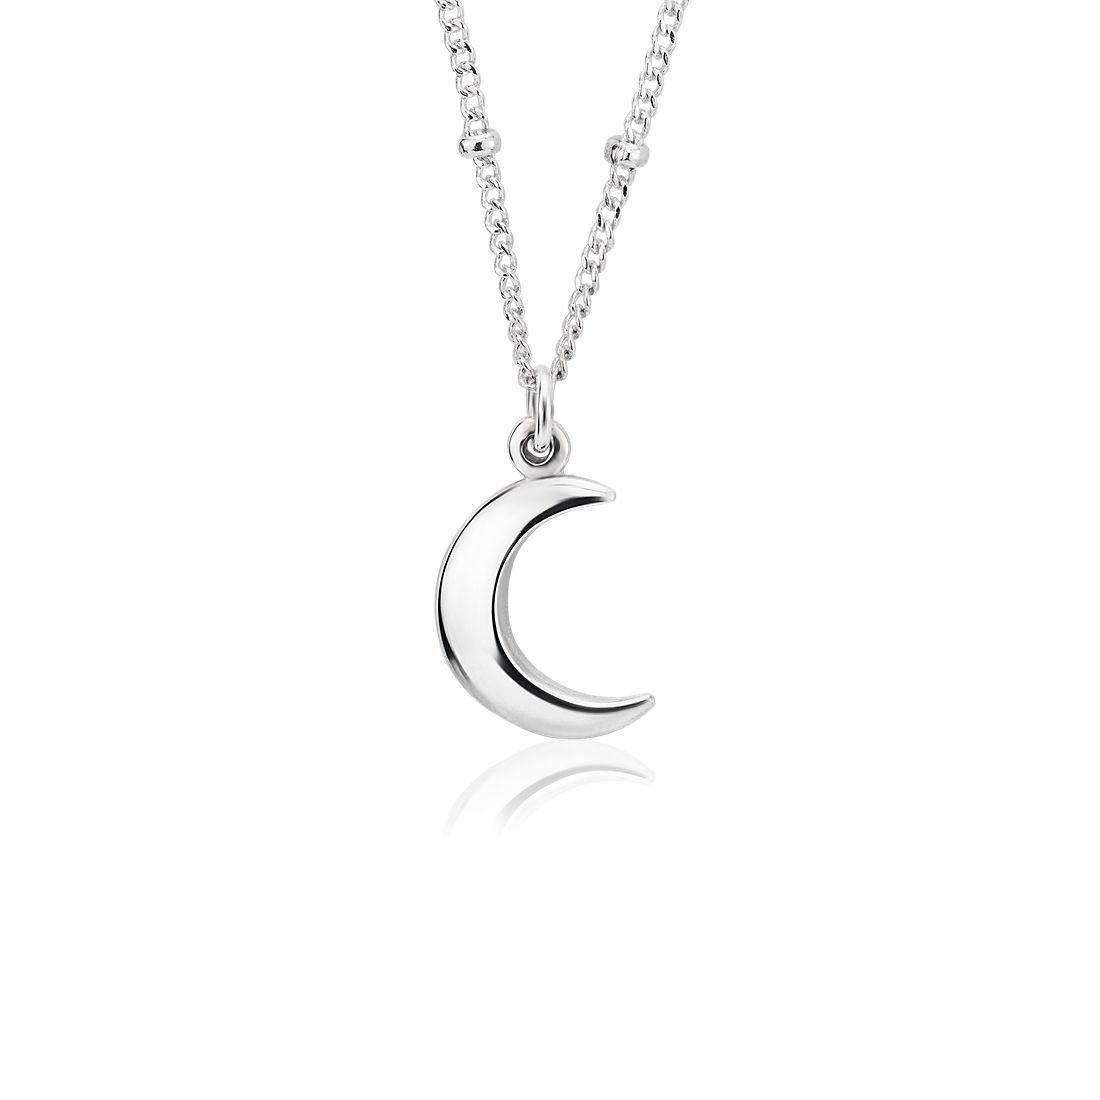 Sterling Silver pendant and necklace